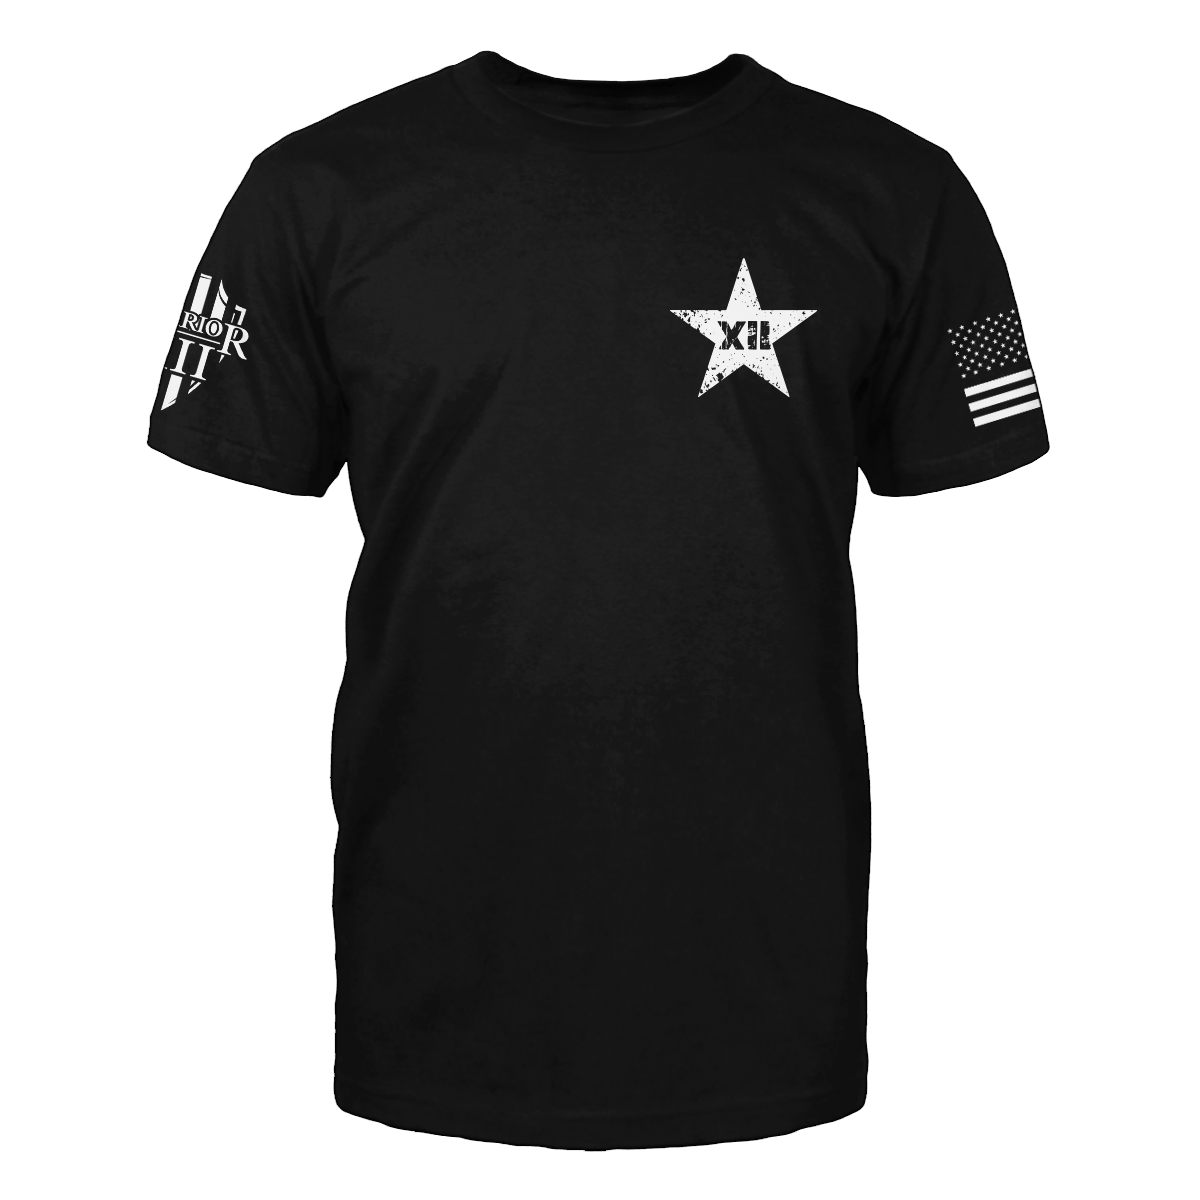 The front of "Texas Strong" featuring small chest print of Star on the upper left side.